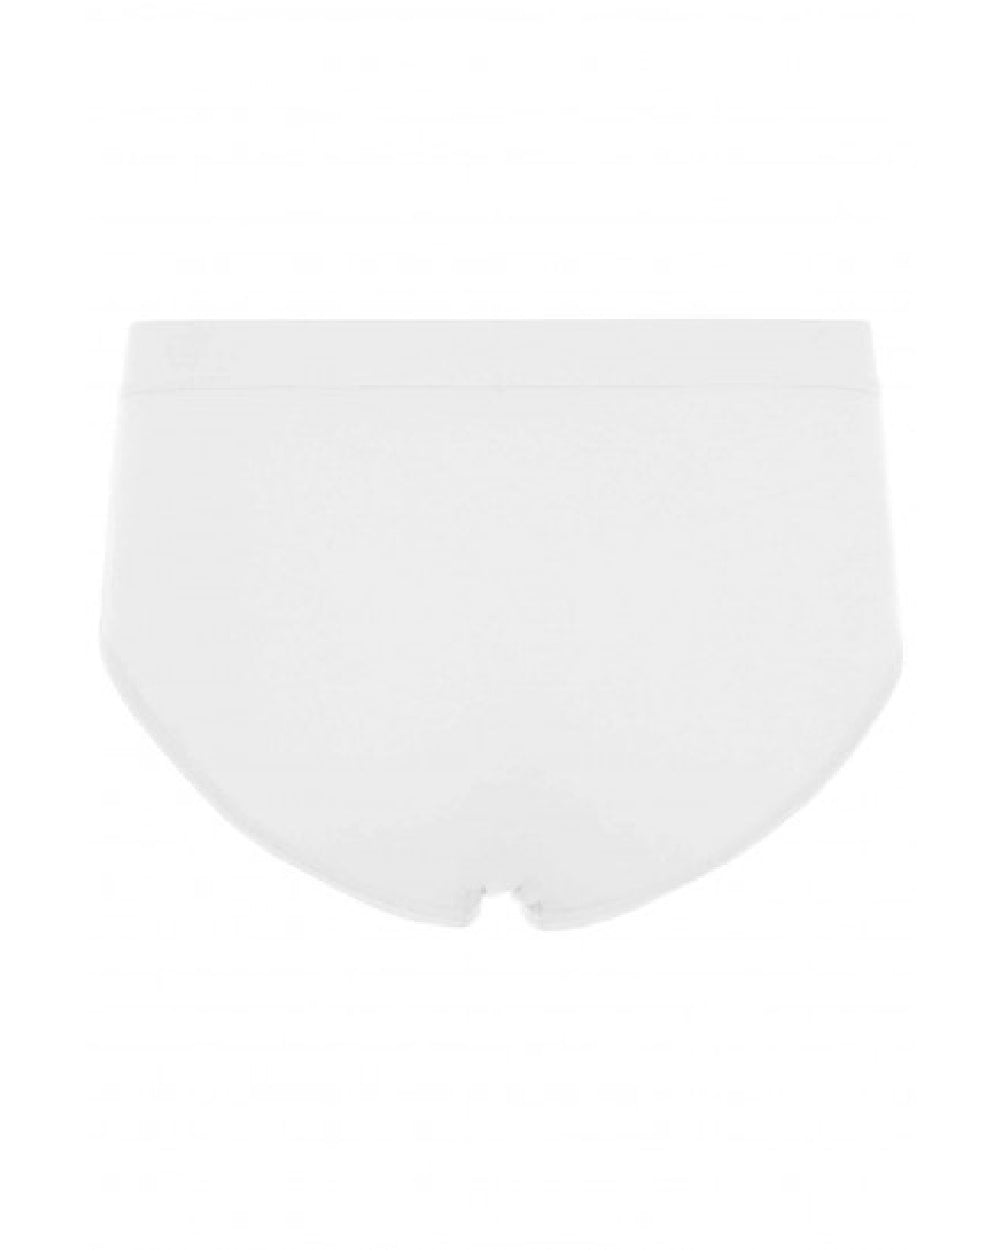 HJ Hall 3 Pack Pure Cotton Fly-Front Briefs in White 